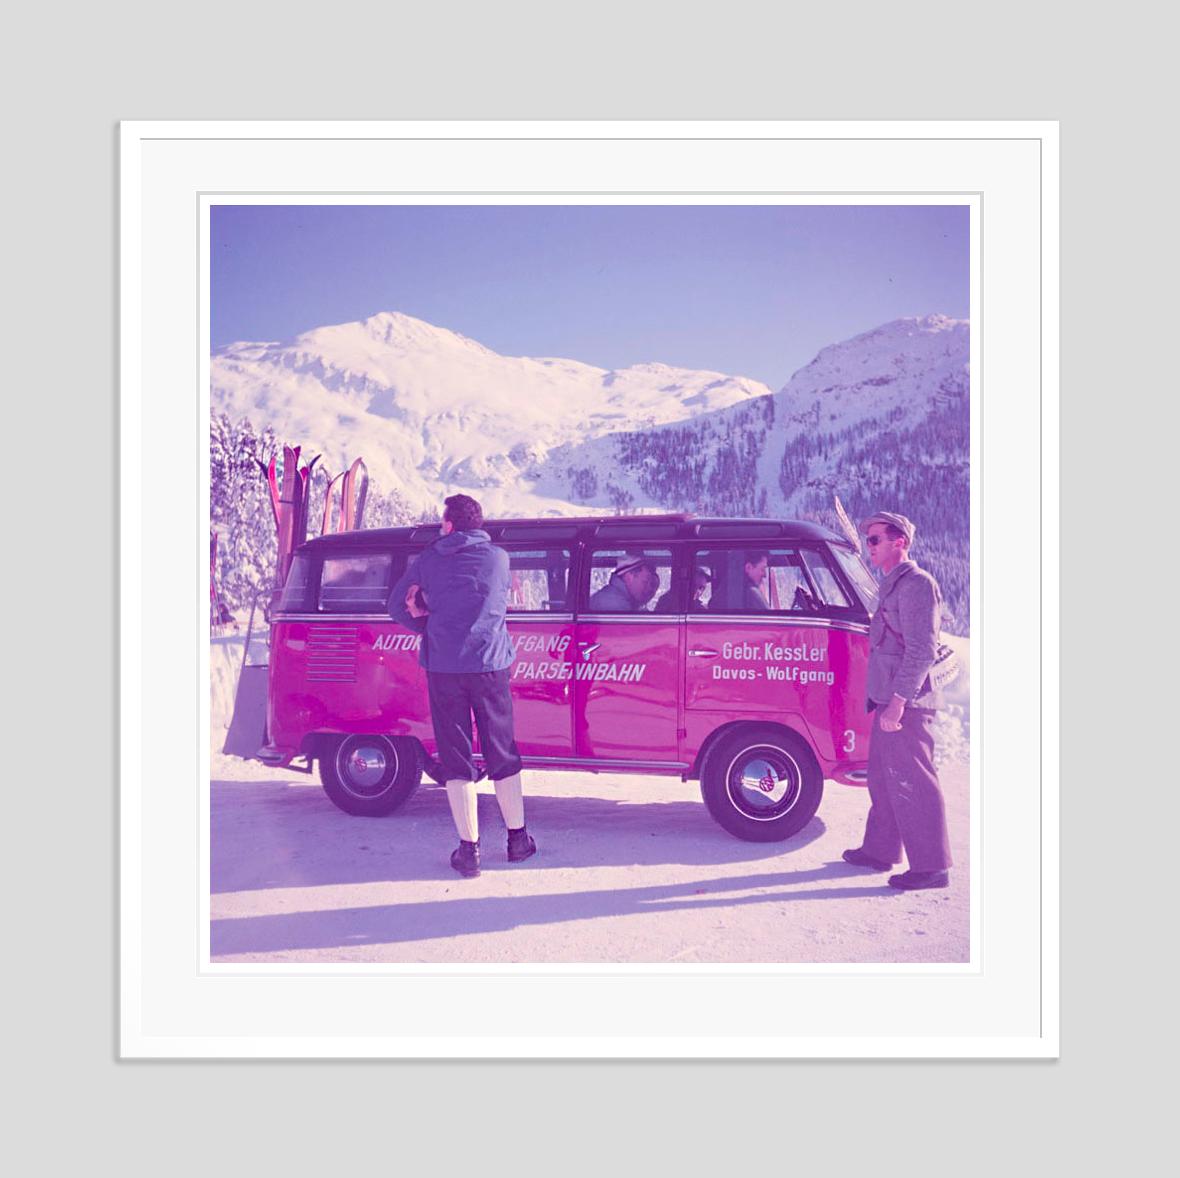 Ski Bus 1951 Limited Signature Stamped Edition  - Modern Photograph by Toni Frissell